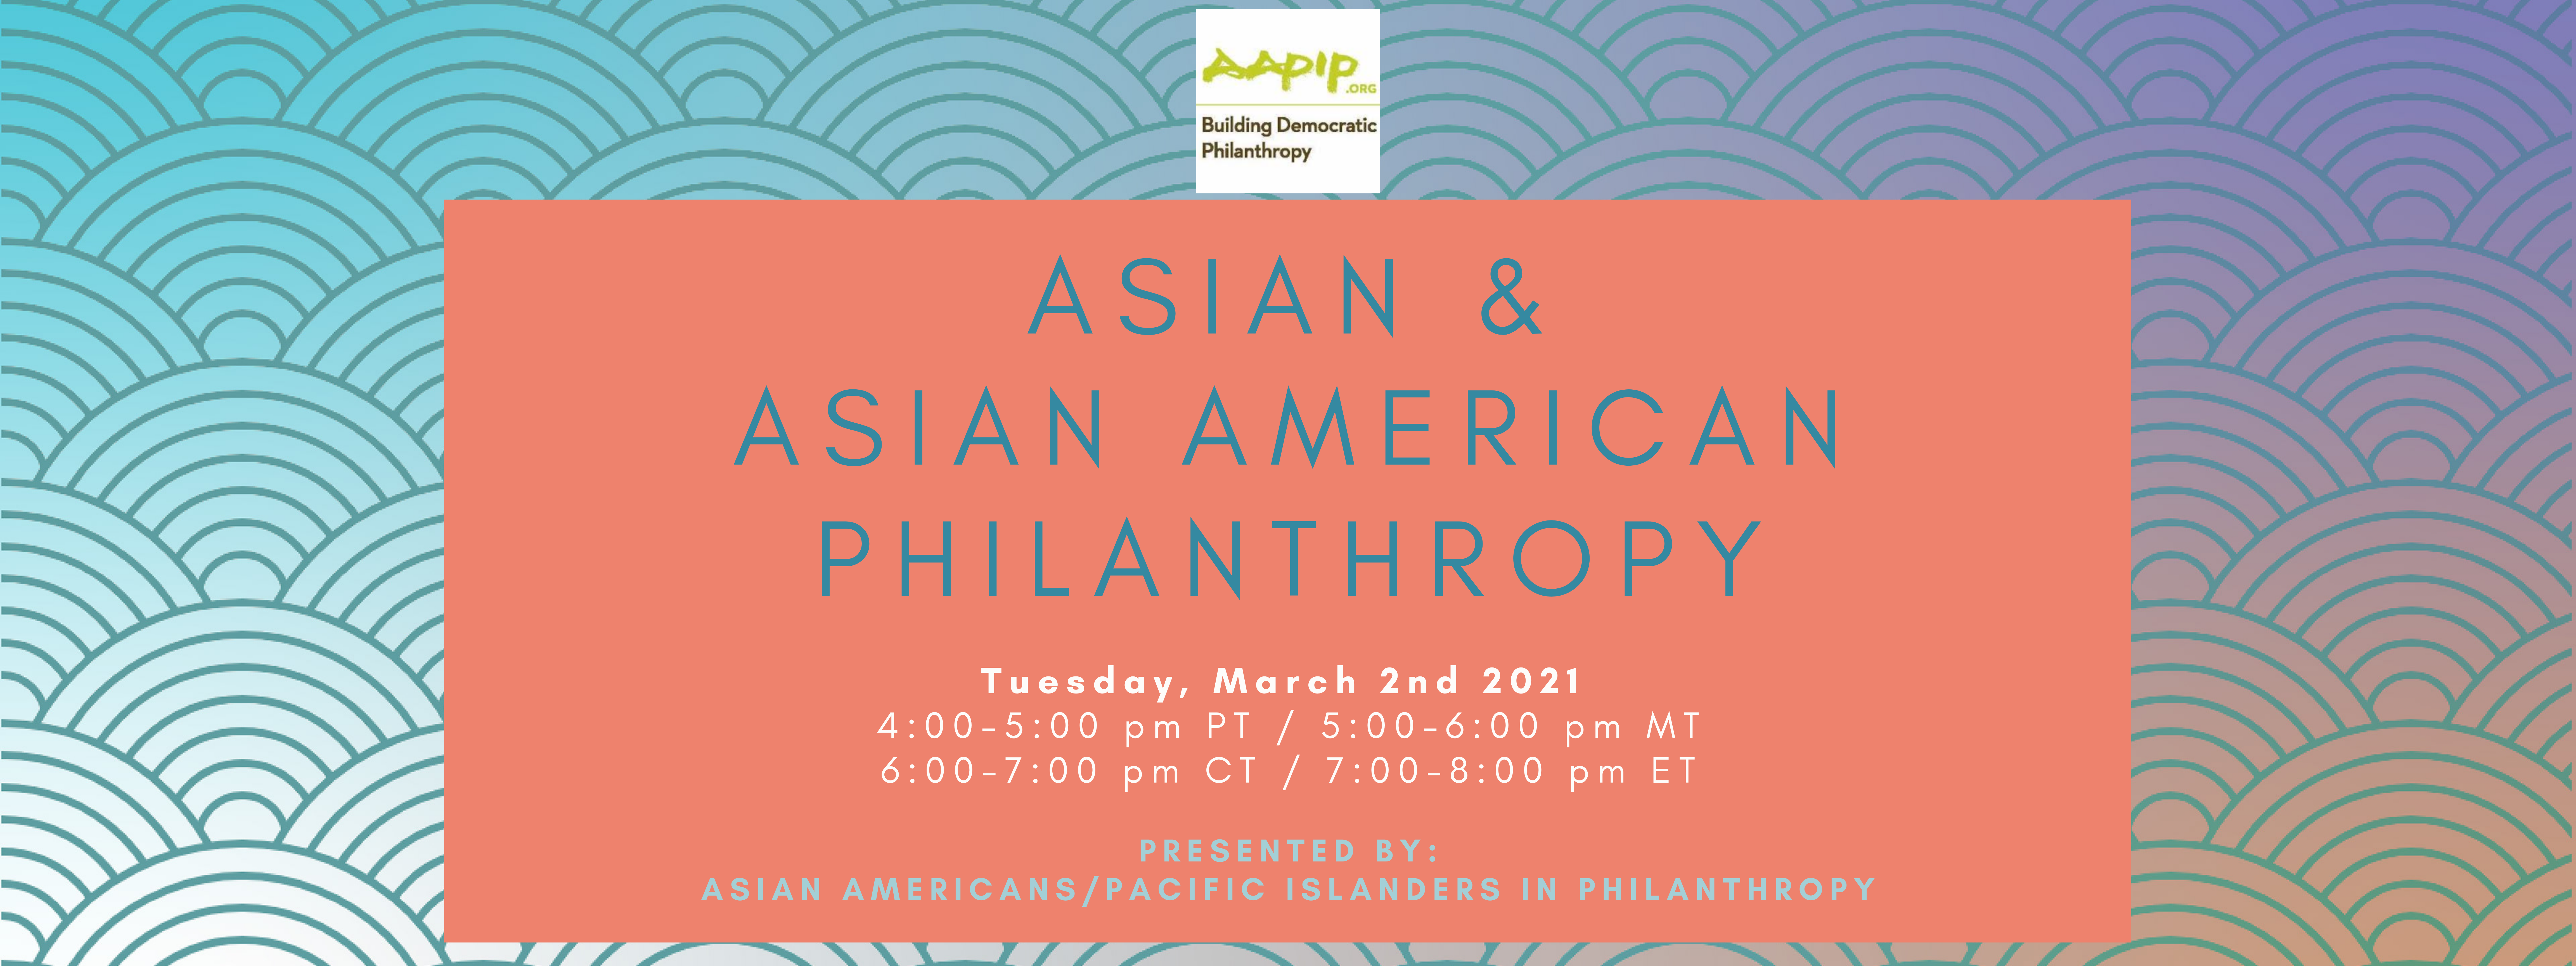 panel_discussion_asian_asian_american_philanthropy